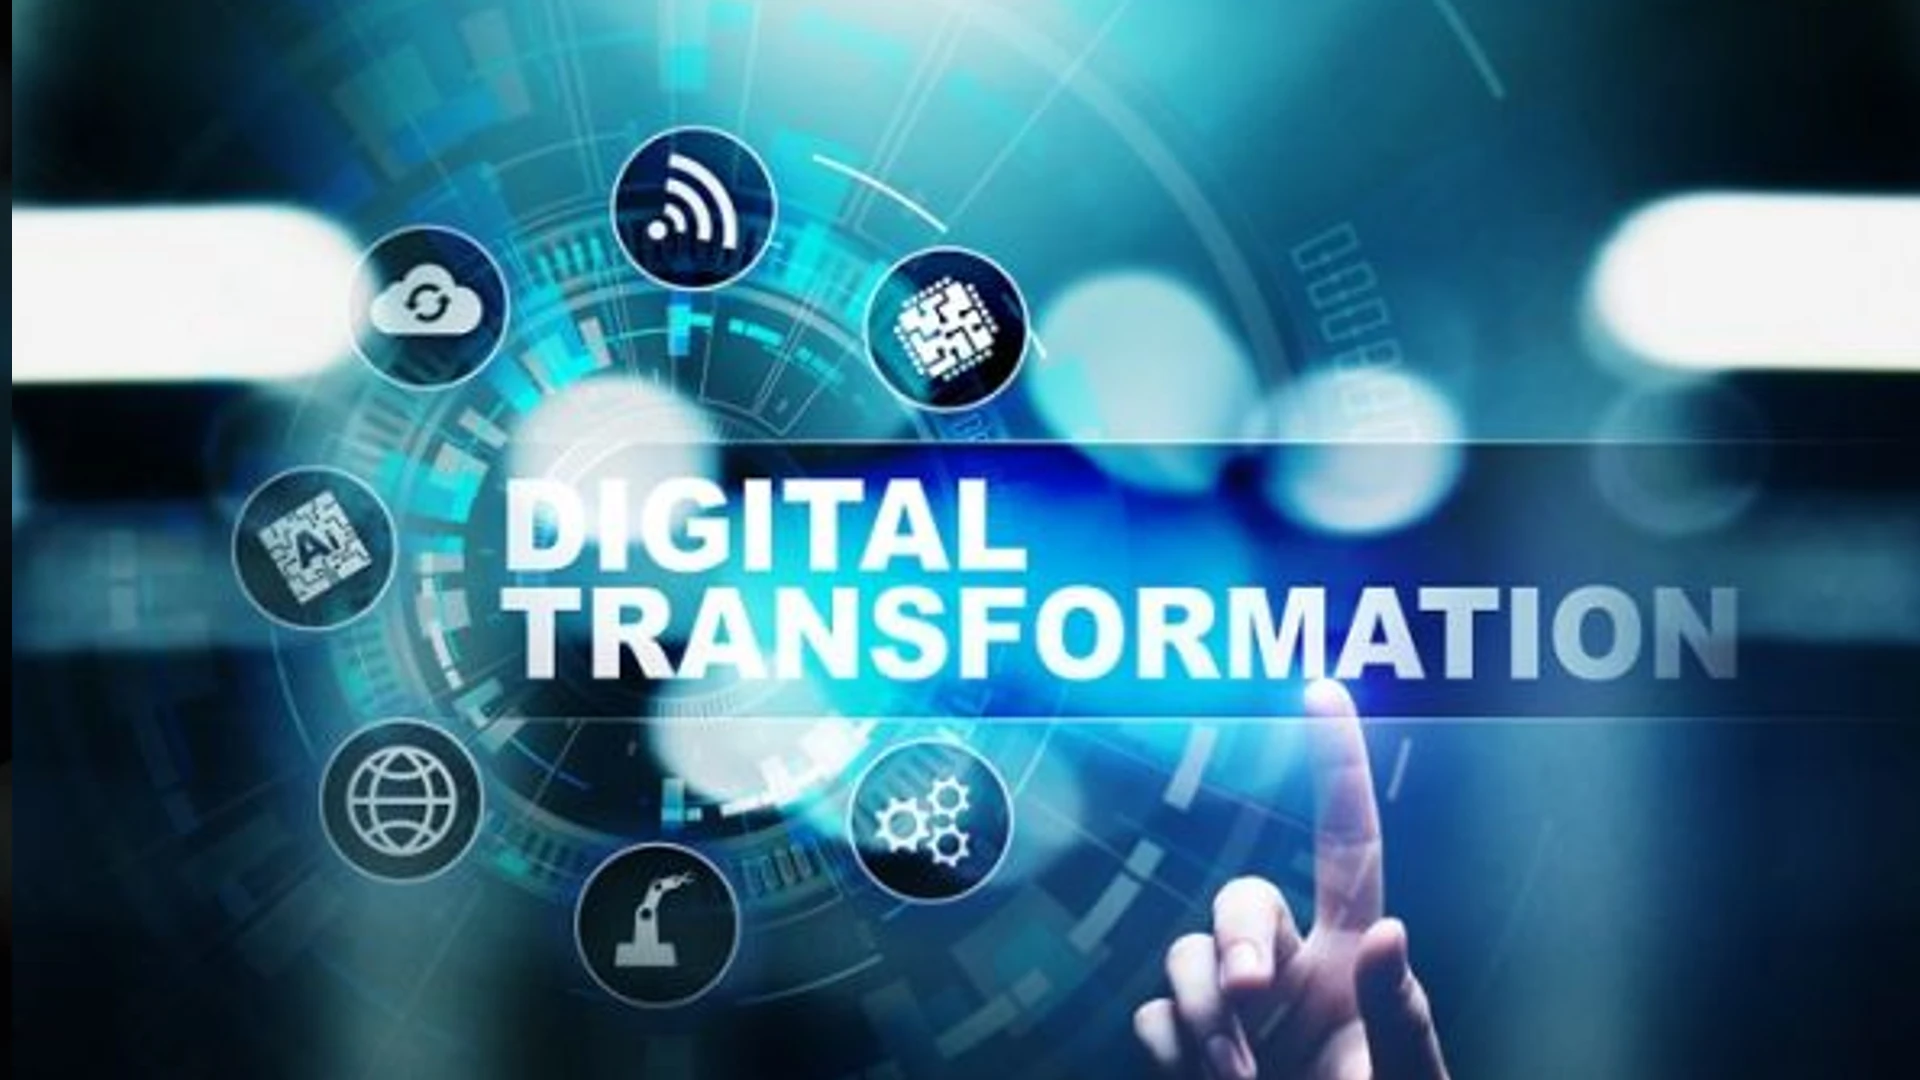 The role of digital transformation in fostering innovation in public administrations